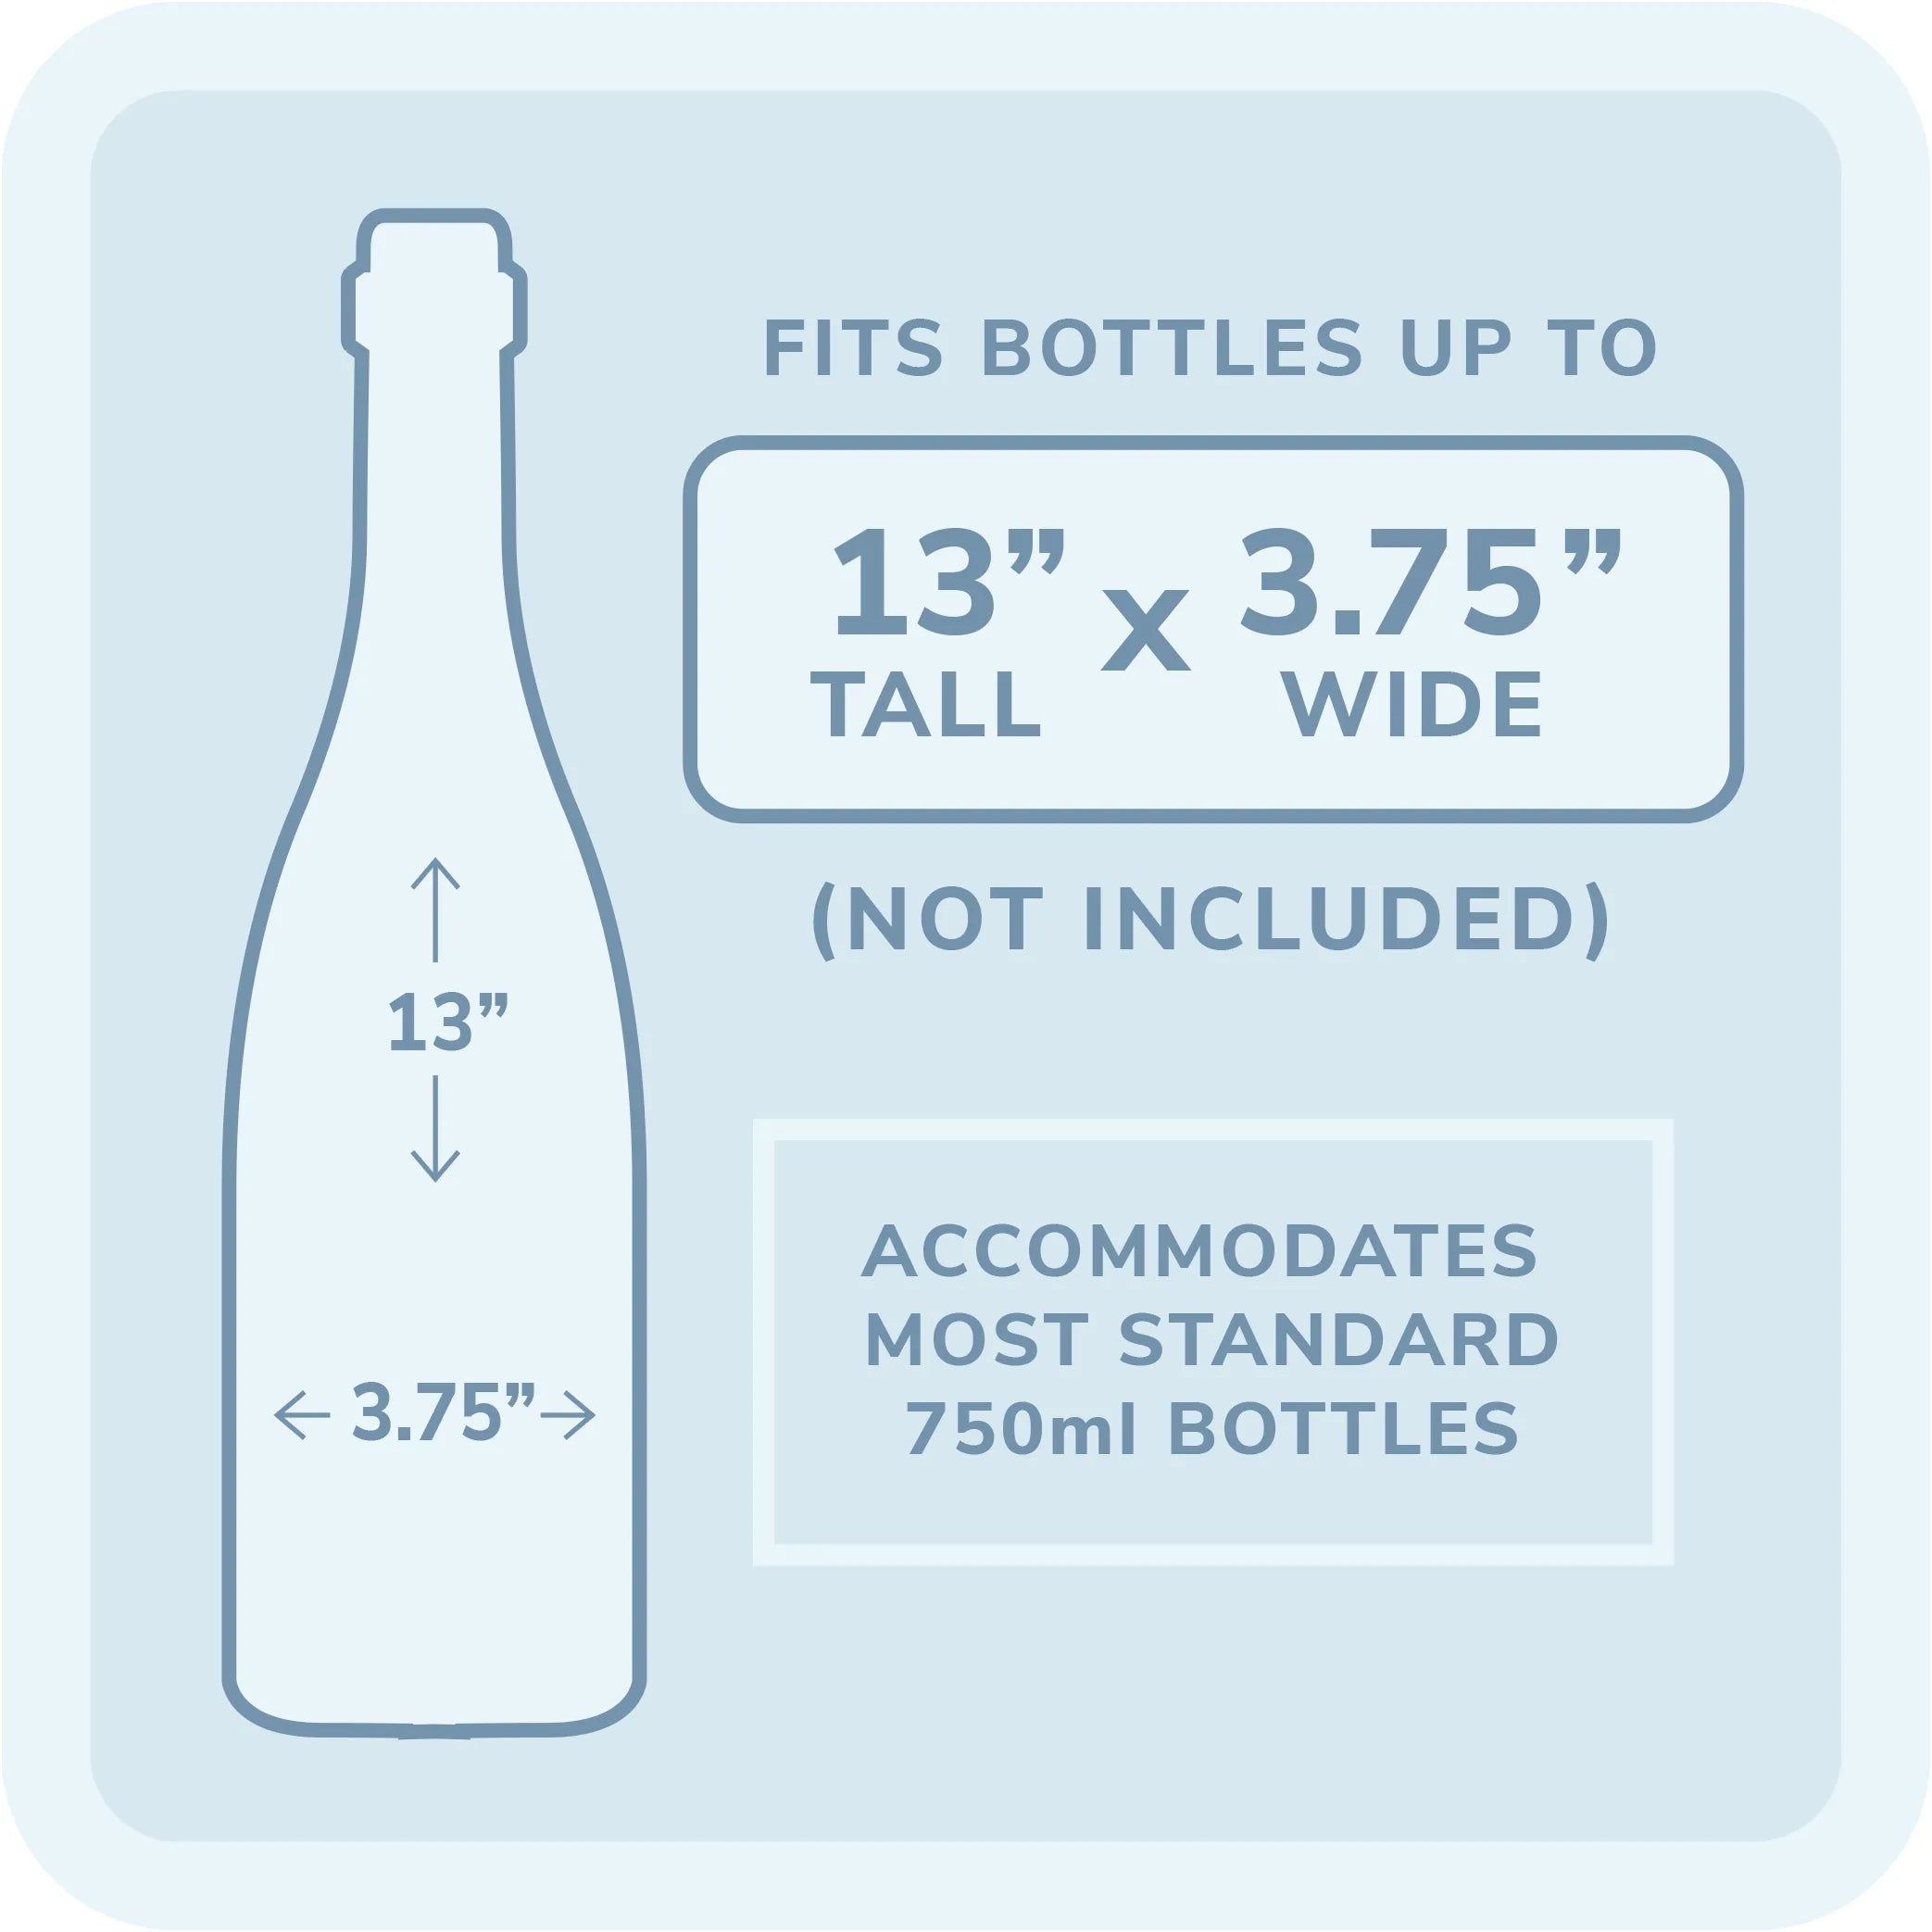 Understand wine bottle dimensions in 5 minutes